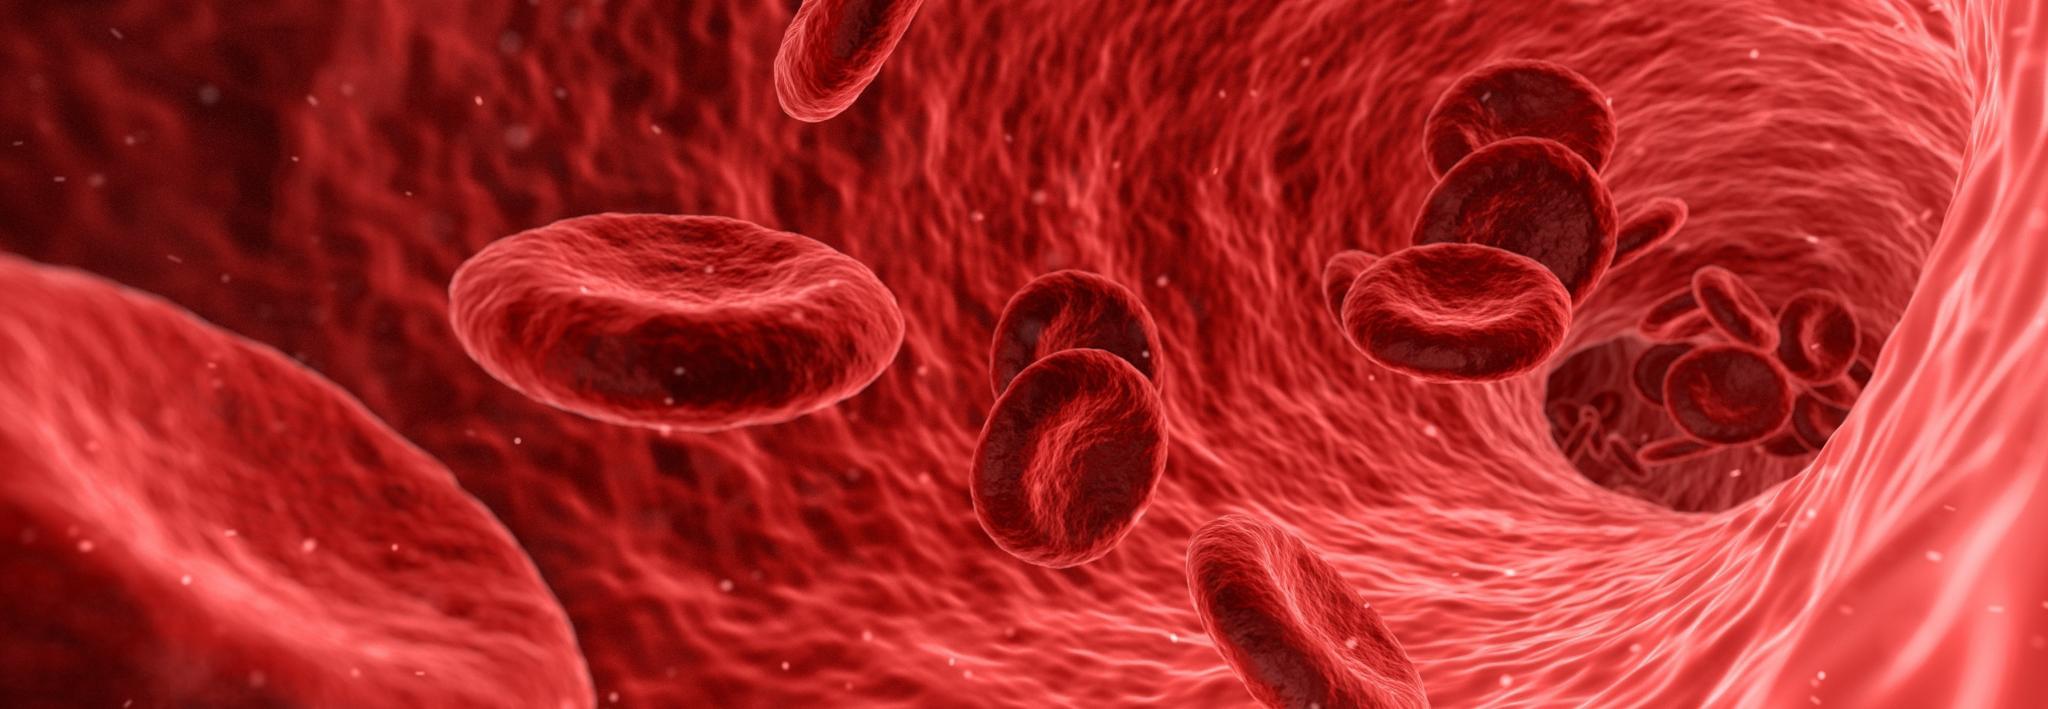 Artist impression of red blood cells in a blood vessel